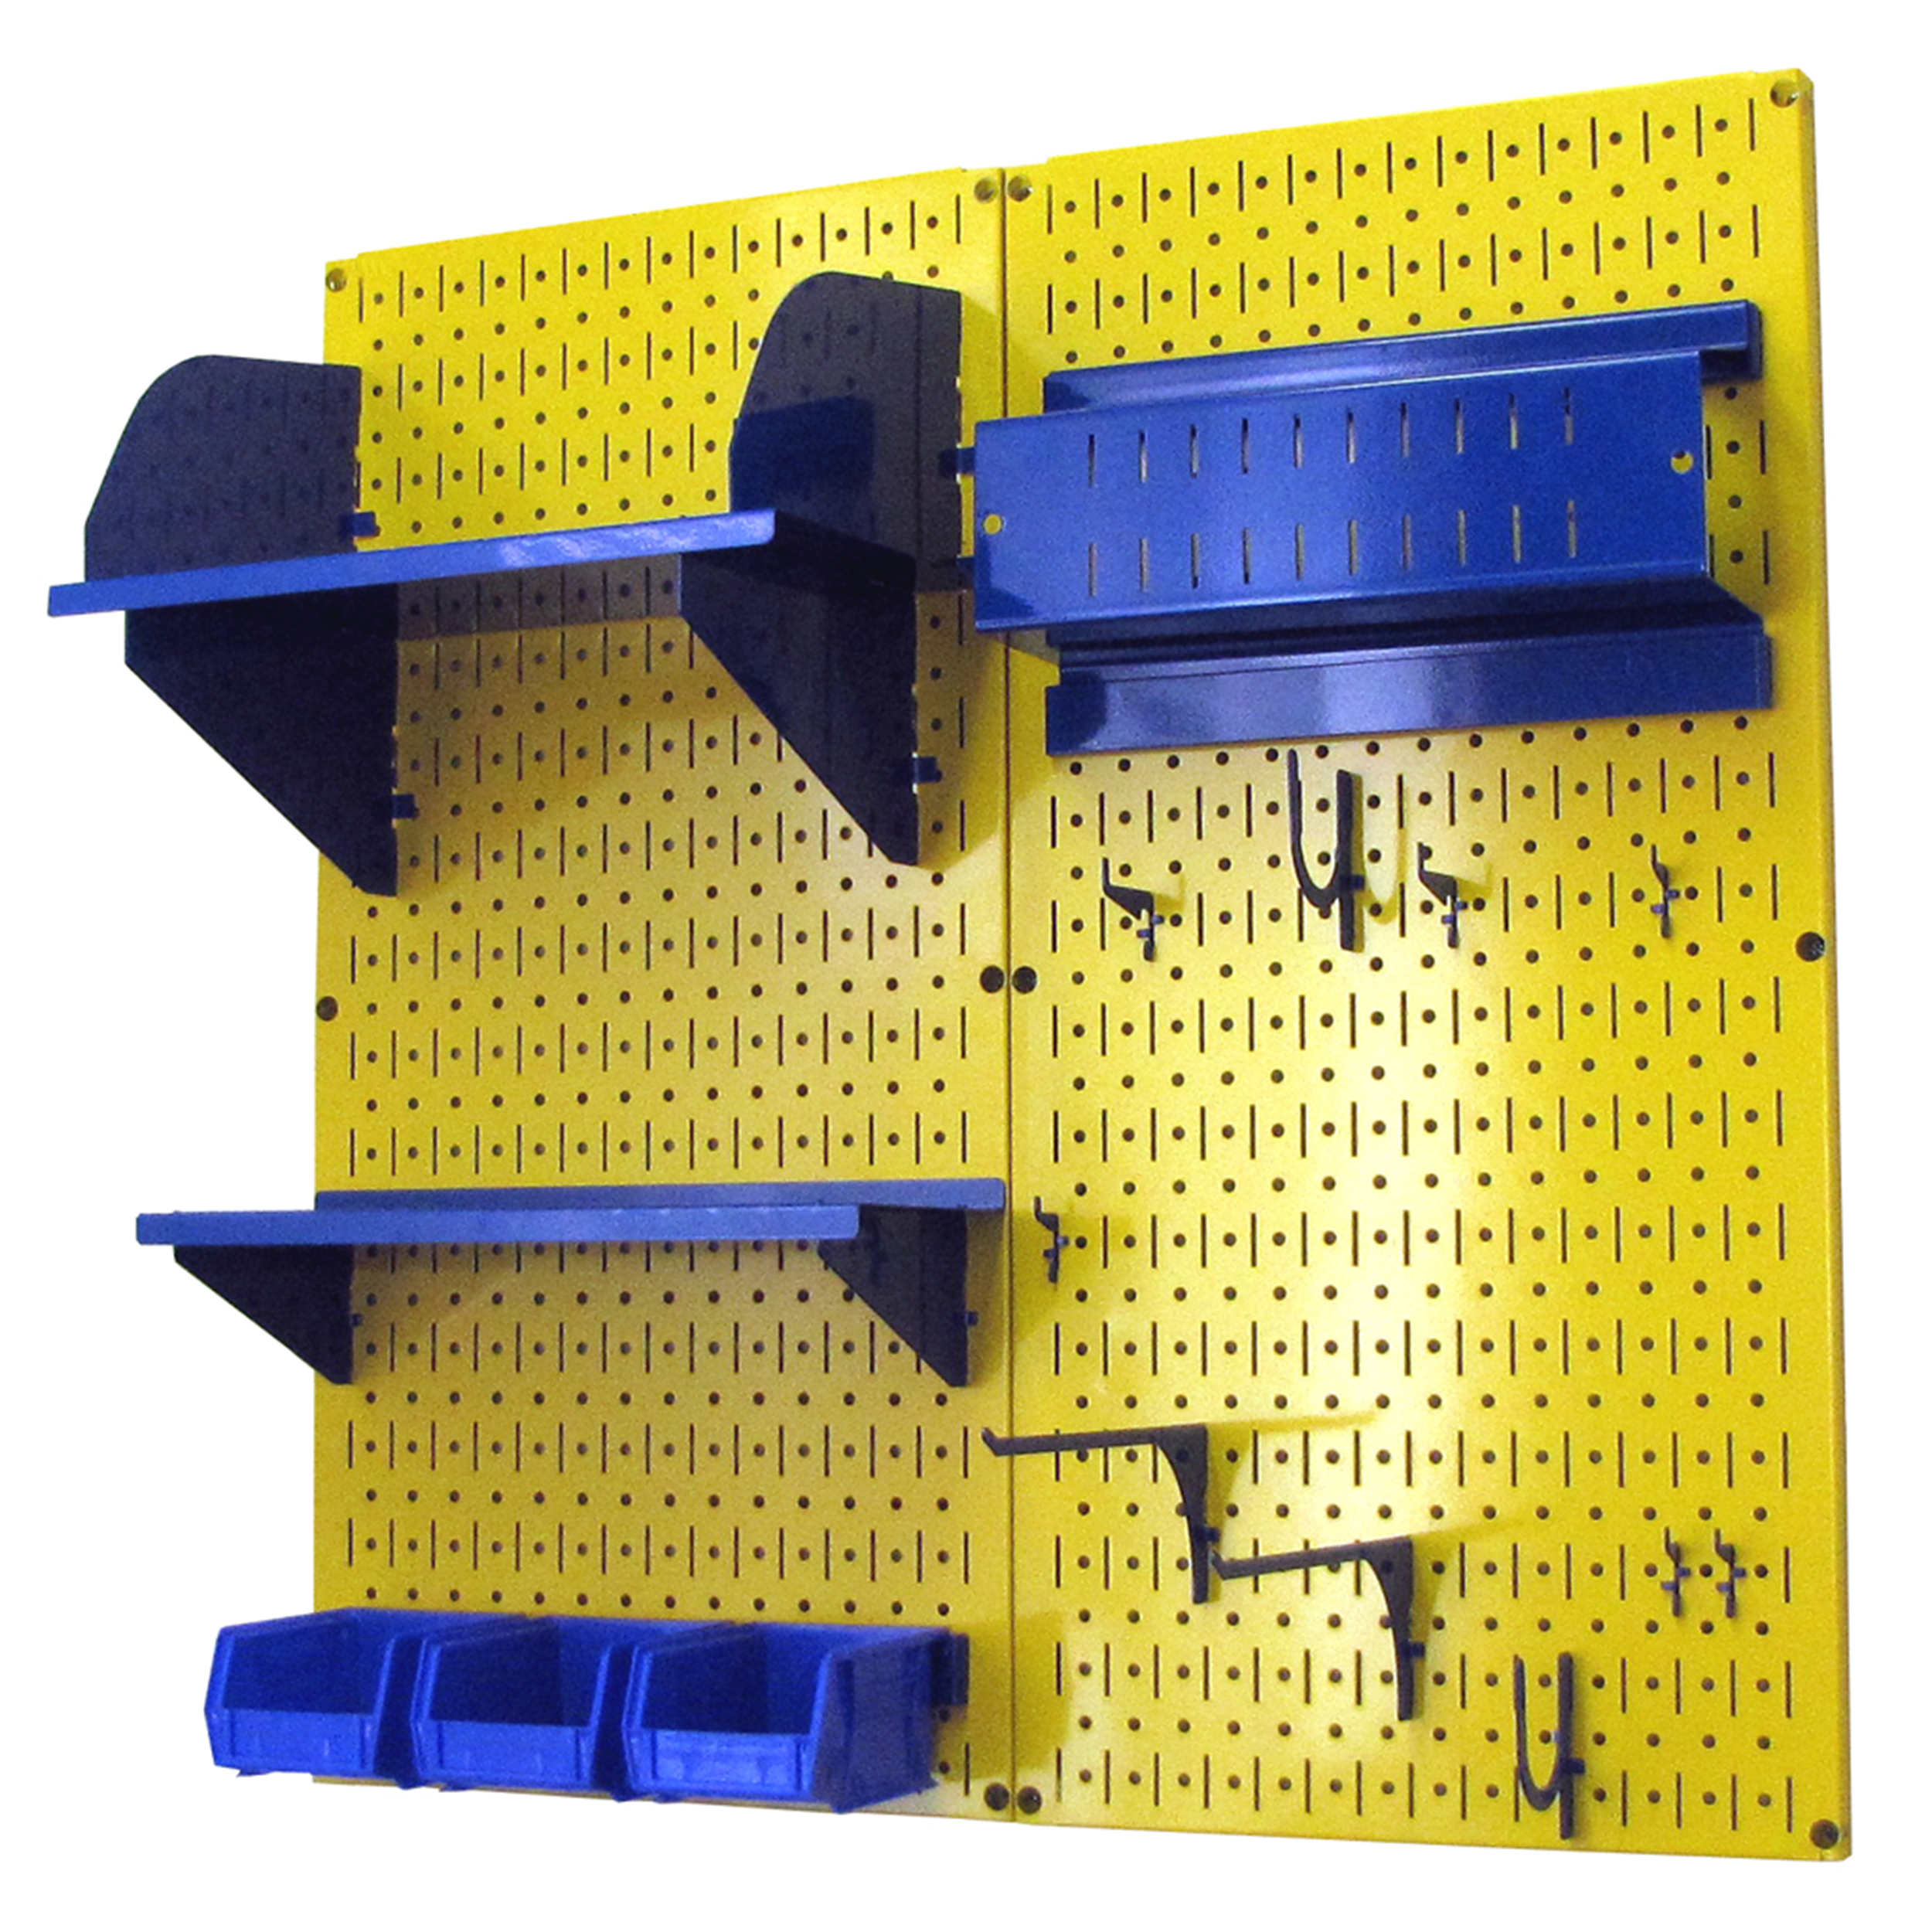 Pegboard Hobby Craft Pegboard Organizer Storage Kit With Yellow Pegboard And Blue Accessories